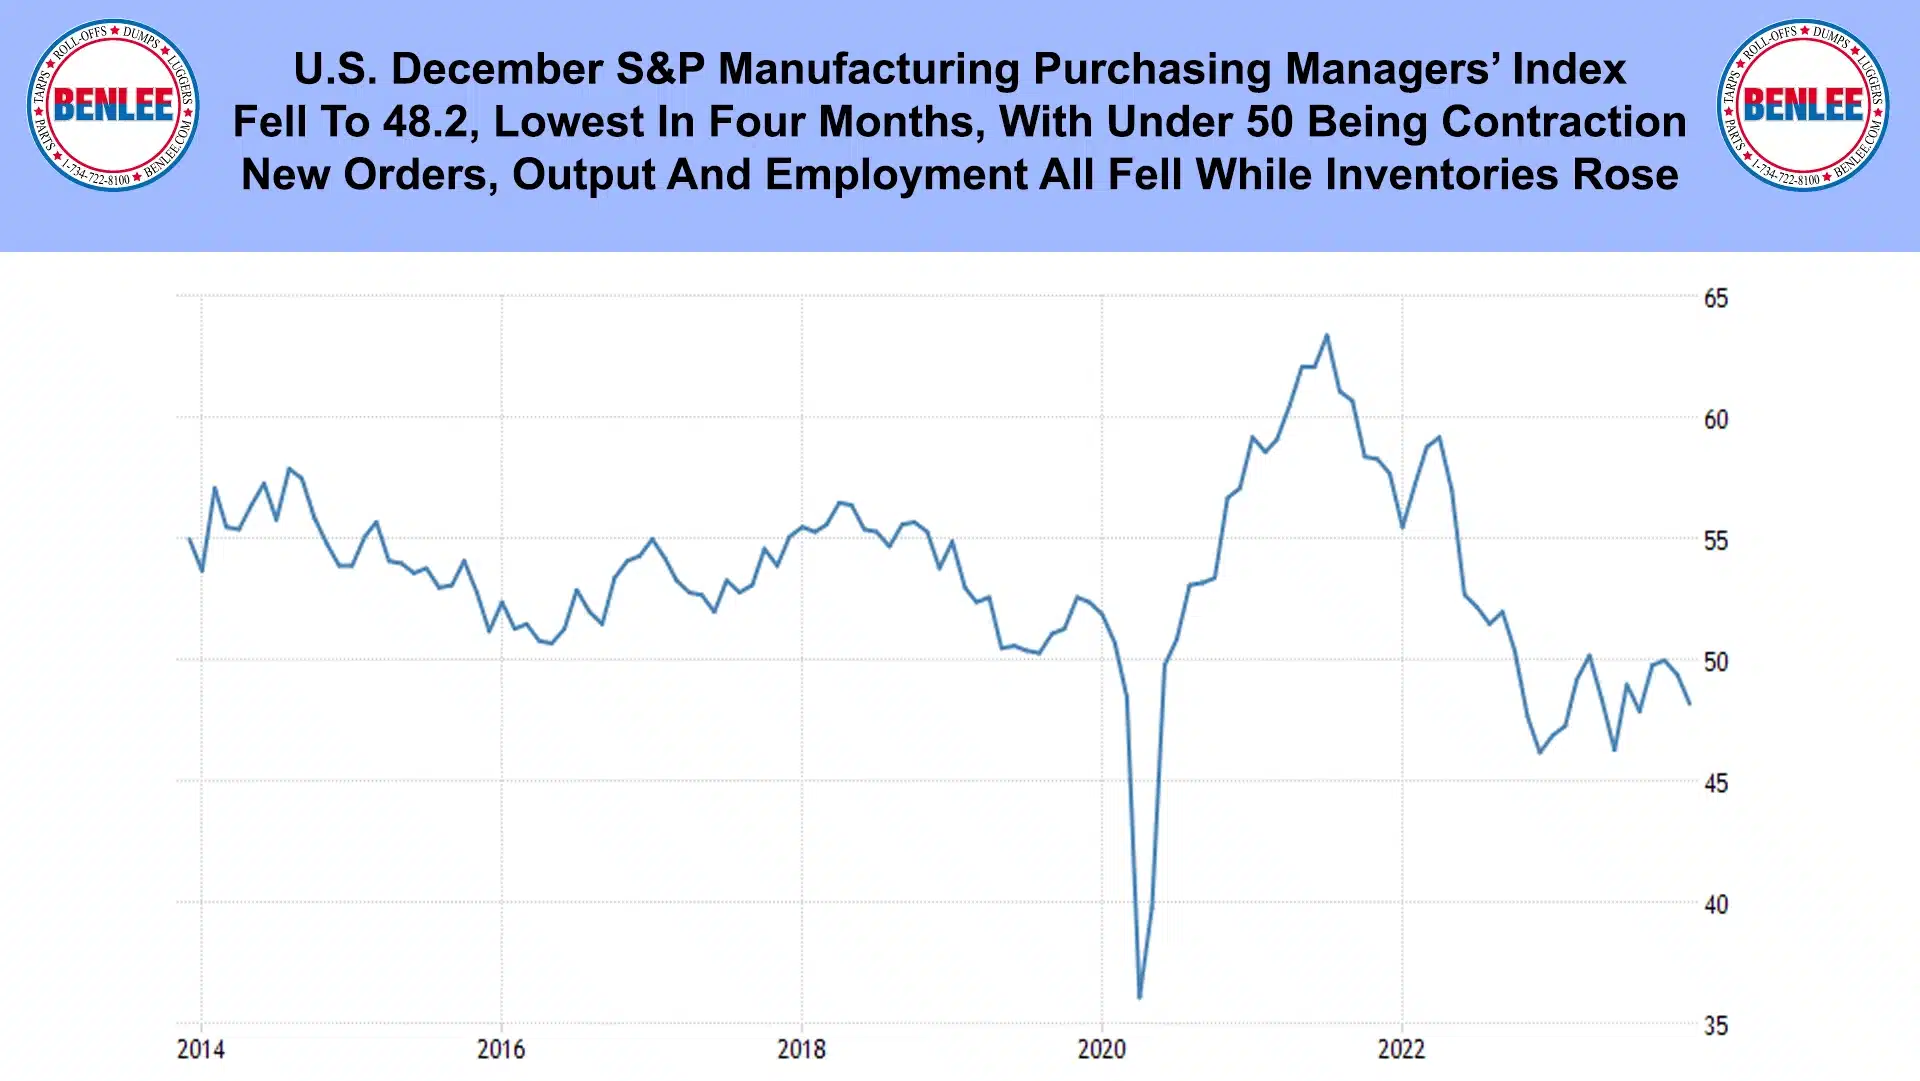 U.S. December S&P Manufacturing Purchasing Managers' Index